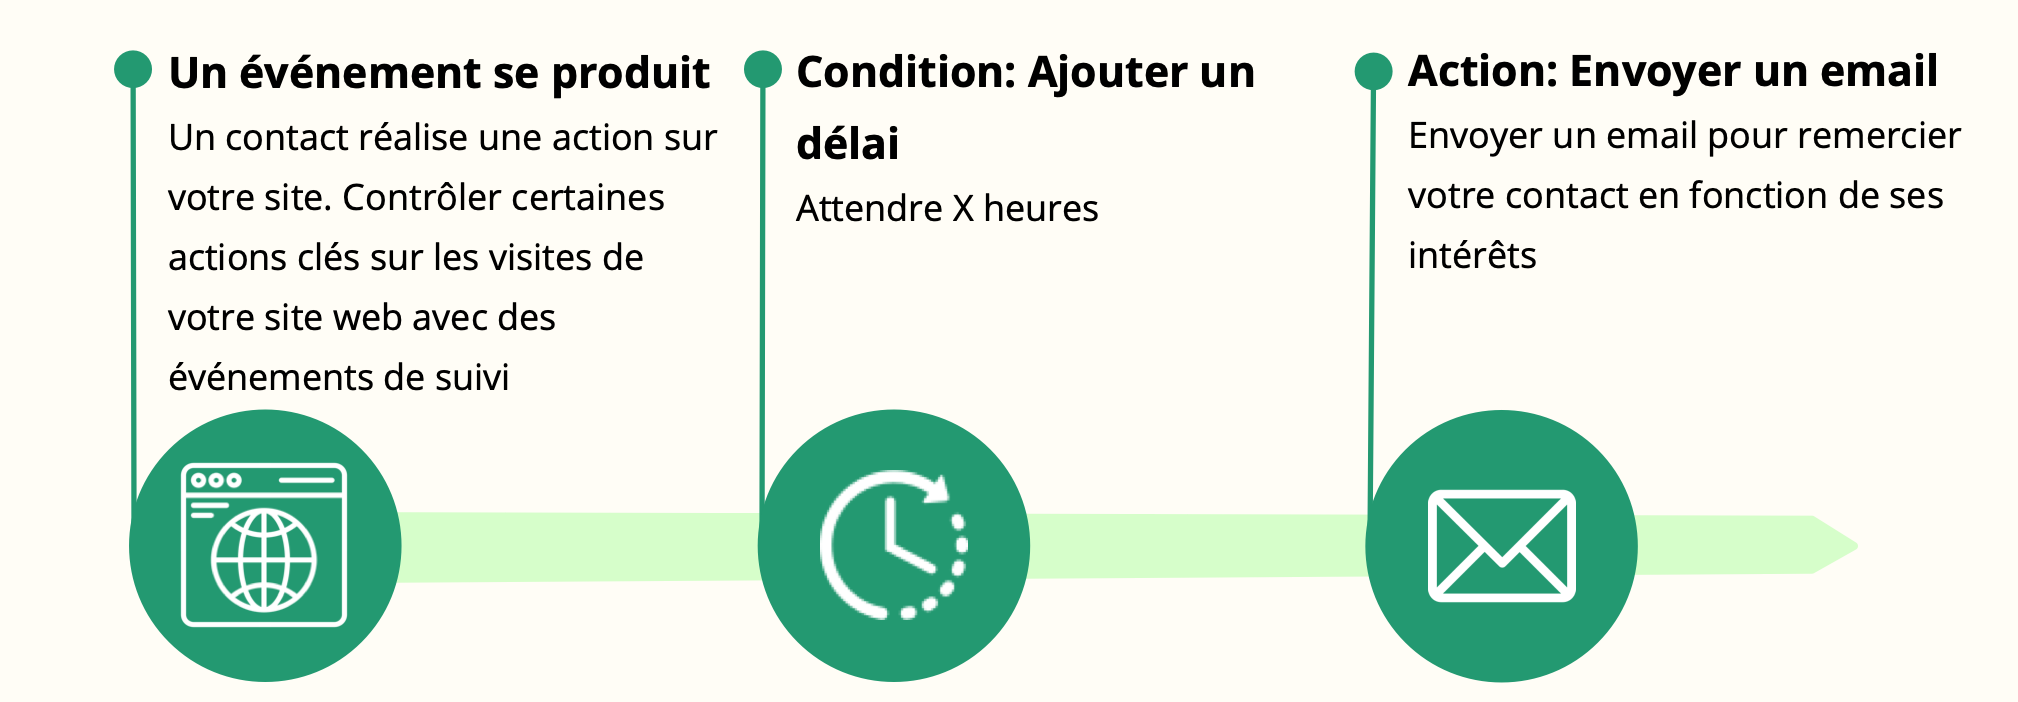 automation_website-event_FR.png